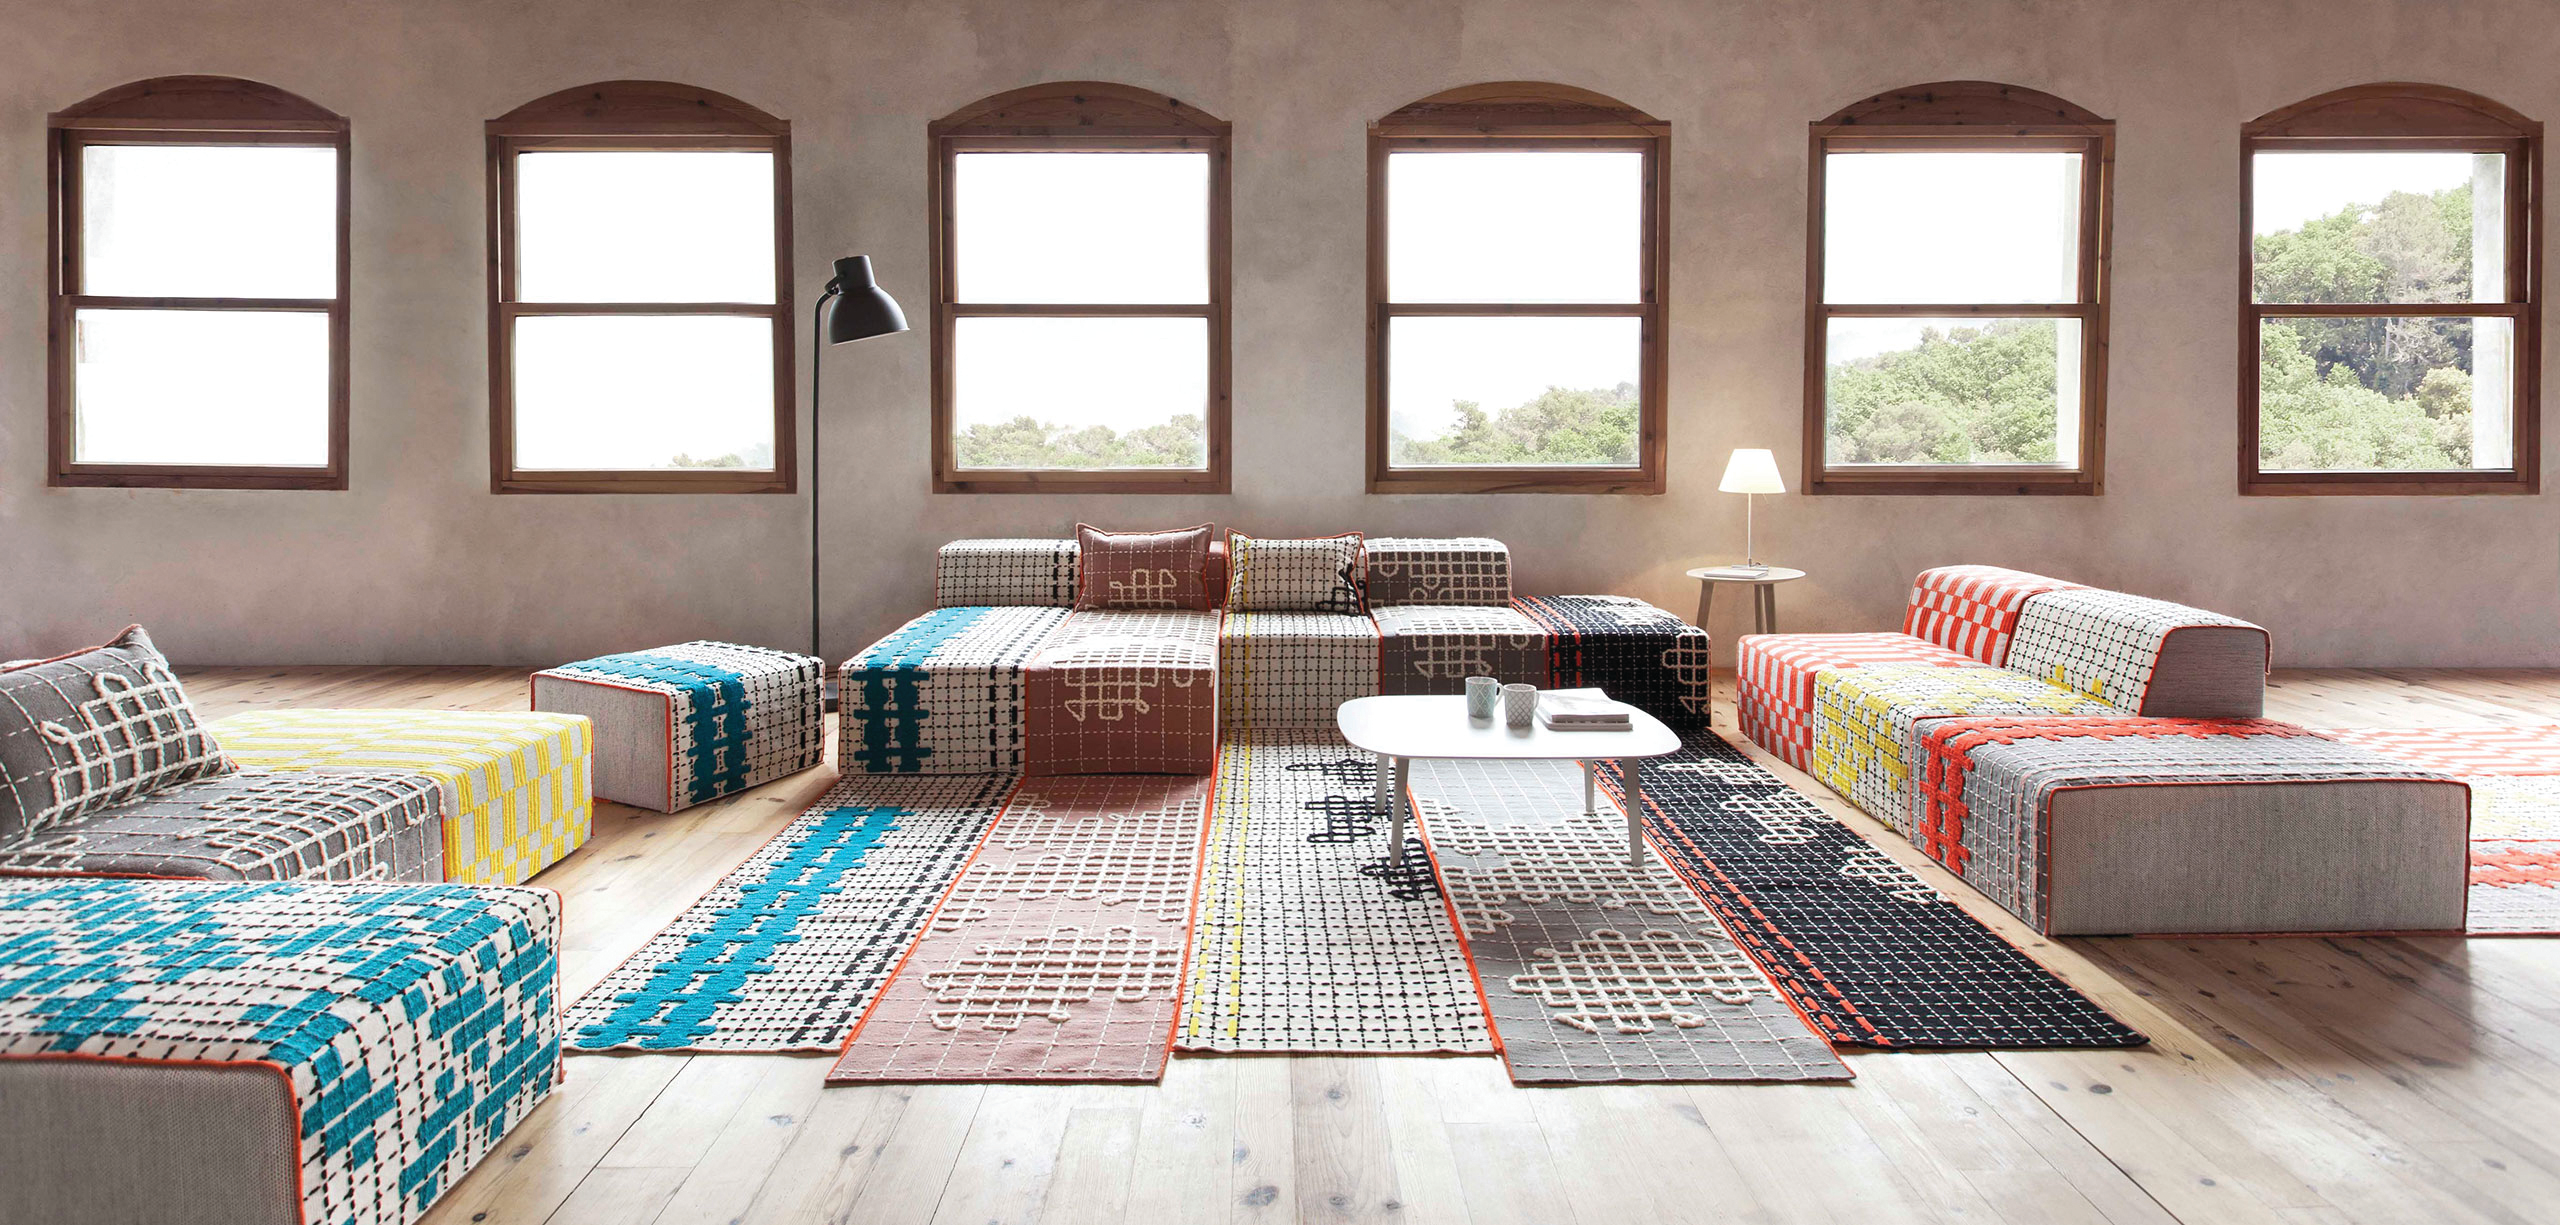 Multicolored rugs in a living space complete with furniture and coffee table with 6 windows in the background